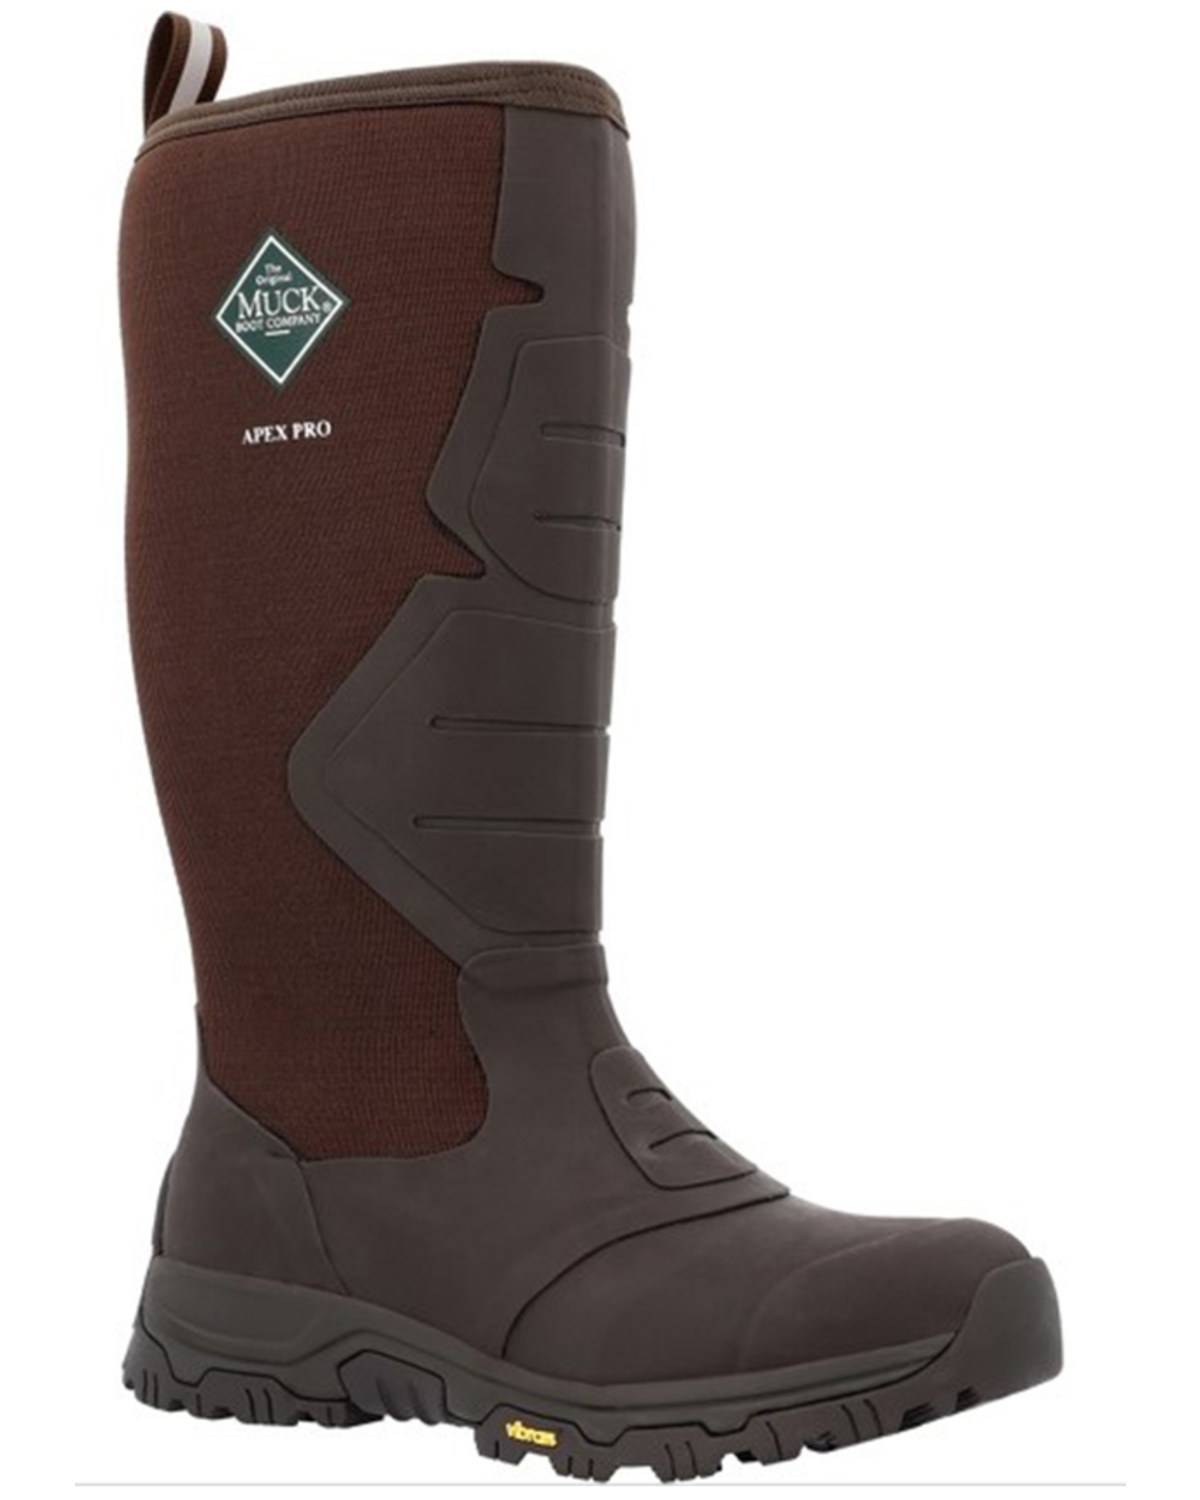 Muck Boots Men's Apex Pro 16" Insulated Western Work - Round Toe